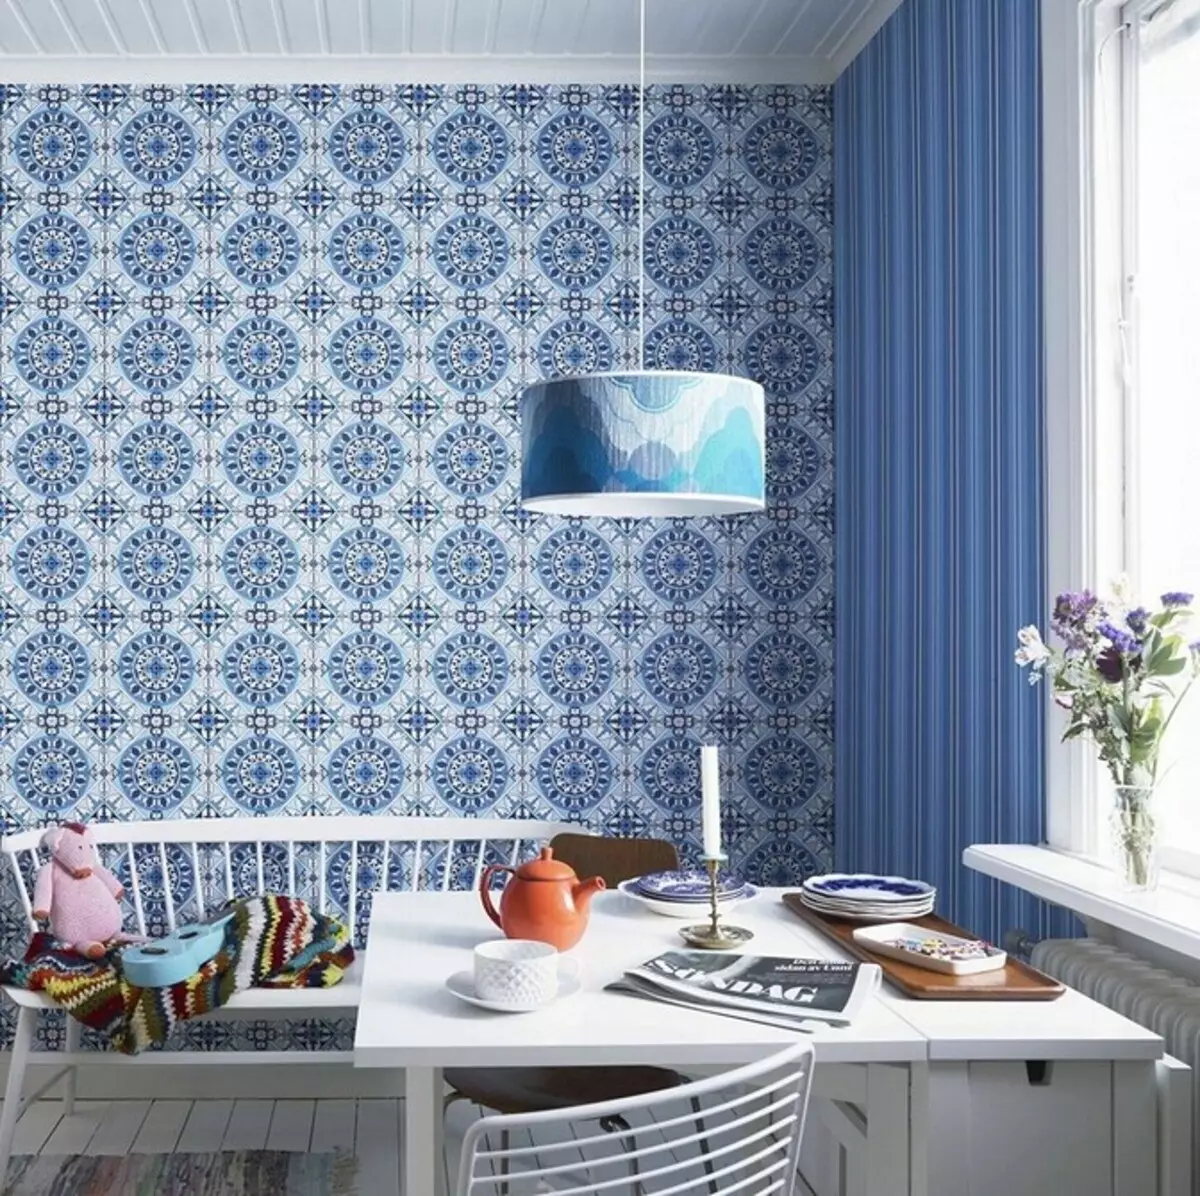 We choose wallpapers for the kitchen: materials, colors and successful combinations 10054_42